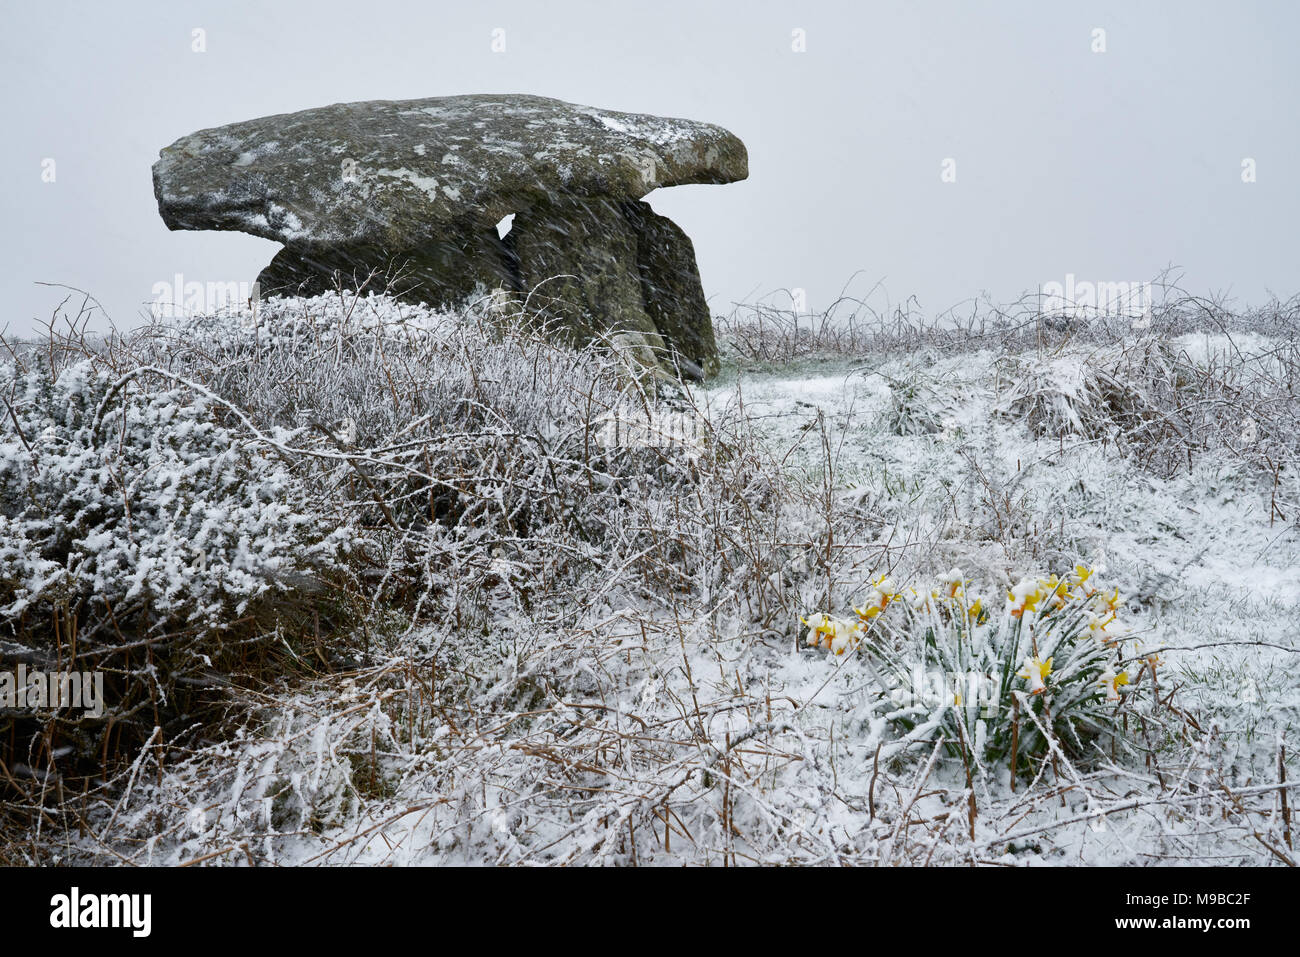 Chun Quoit. 3000/4000 BC. Neolithic Burial chamber in West Cornwall. 18 March 2018 one week before British Summer Time (BST) begins Stock Photo